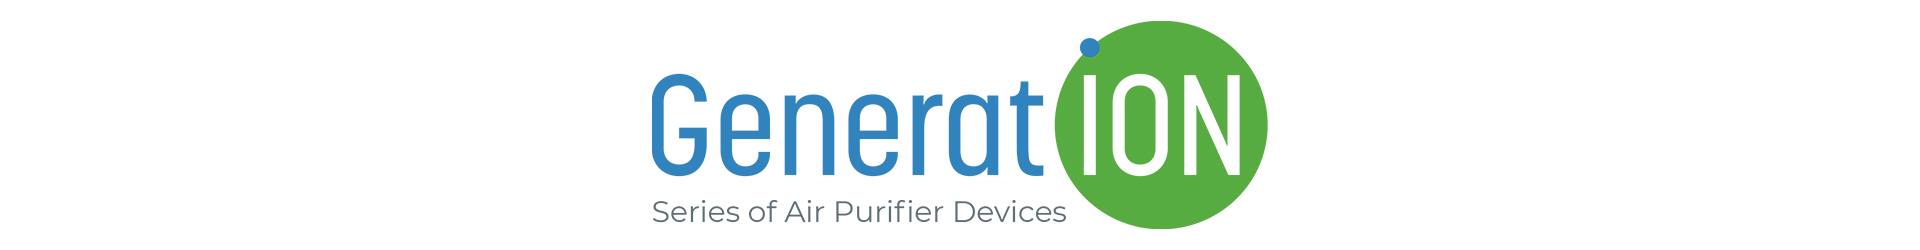 GrnratION - Serie Air Purifier Devices